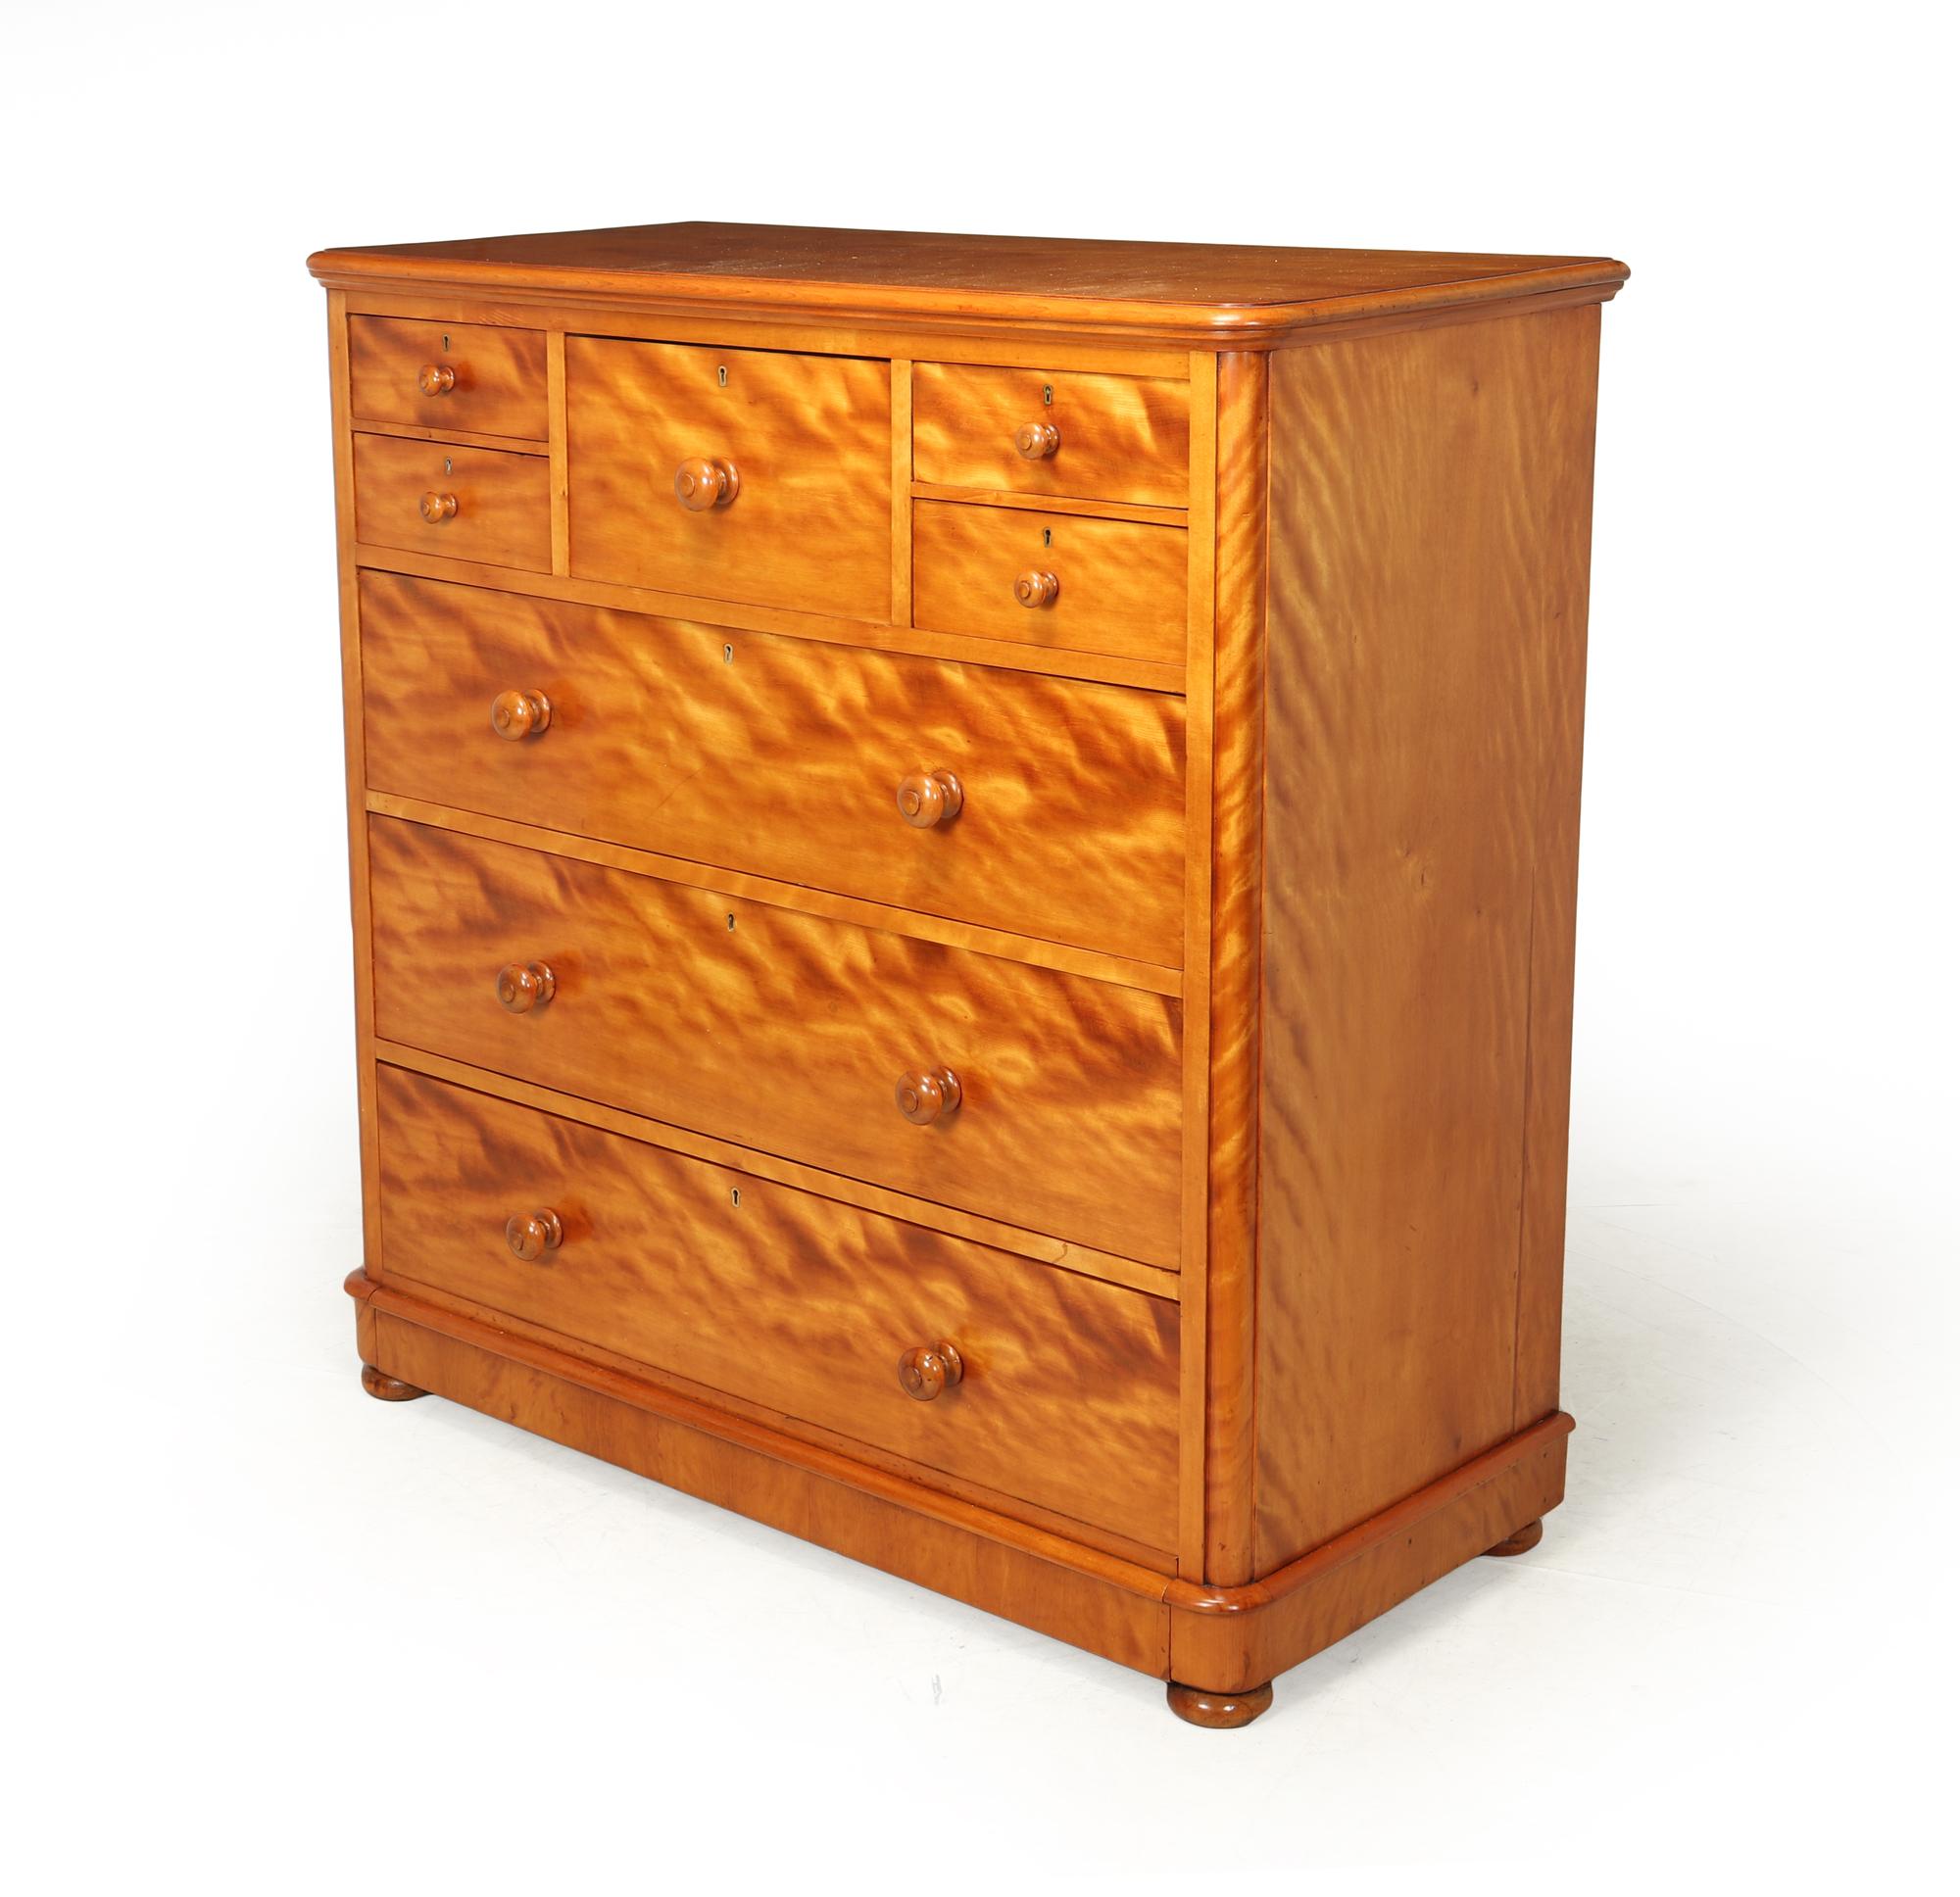 Victorian Antique Chest of Drawers in Satin Birch by Maple and Co